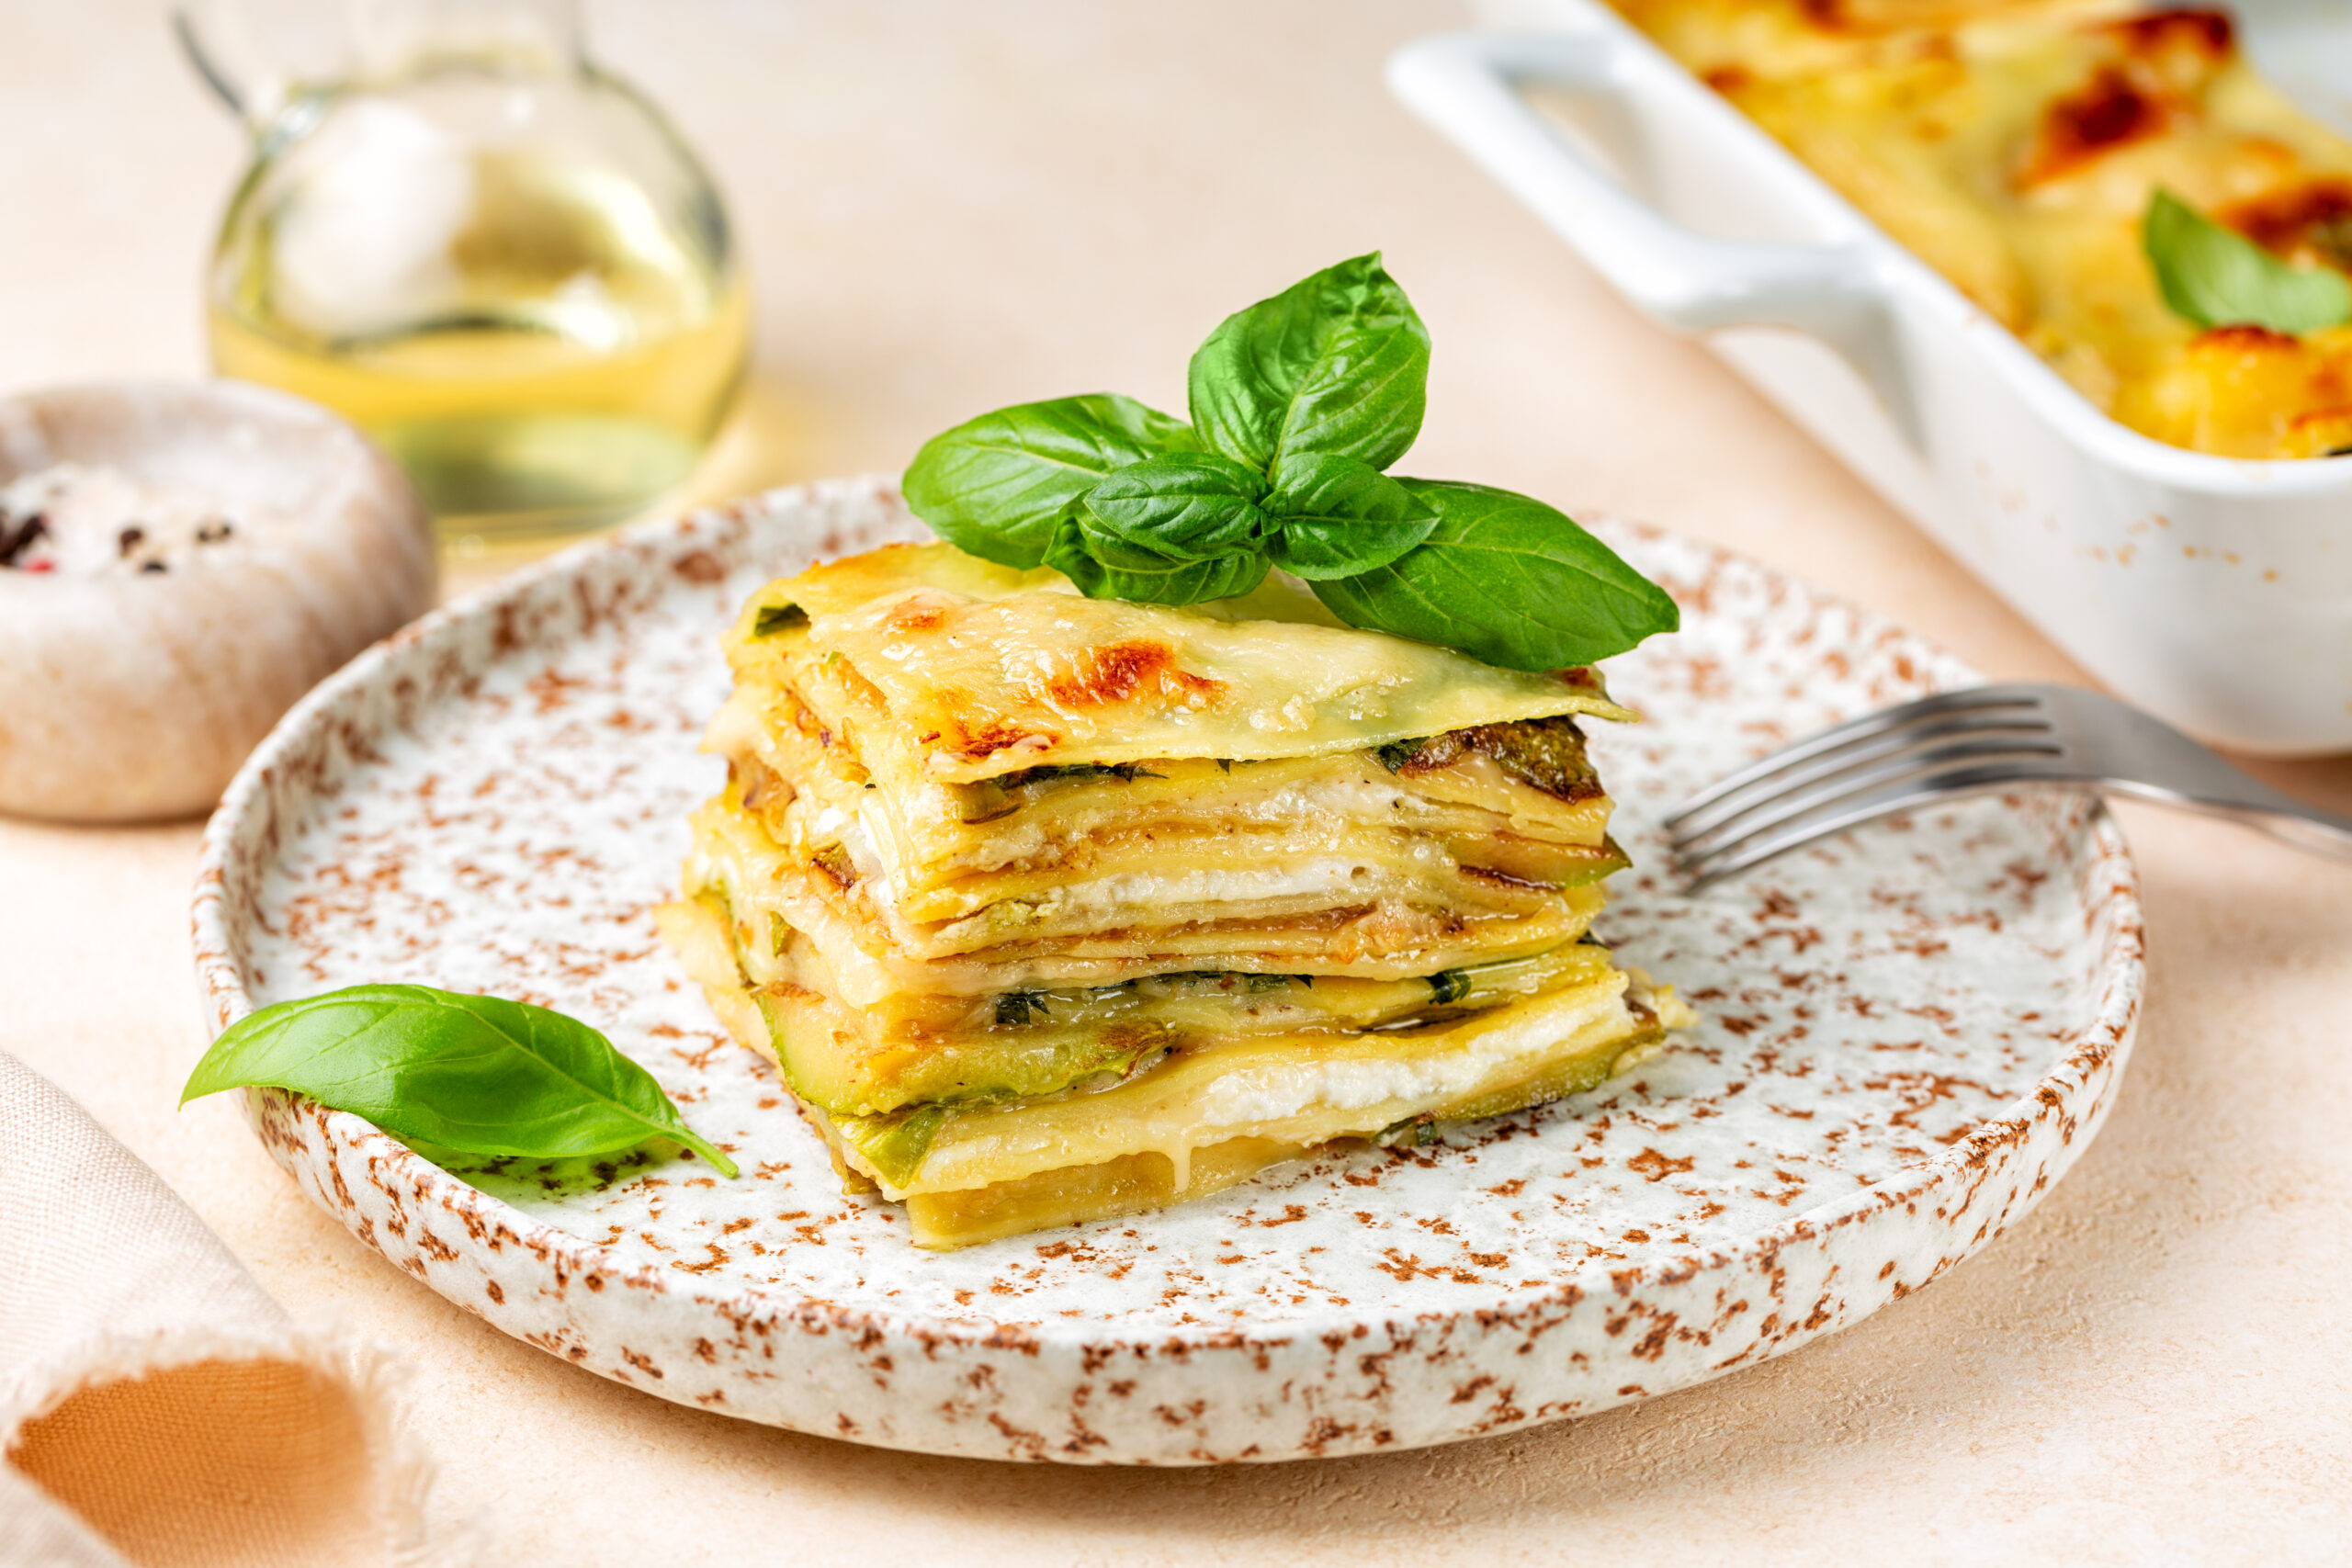 Lasagna with zucchini or courgette, ship cheese, bechamel sauce. Decorated with basil leaves. Vegetarian italian pasta dish.